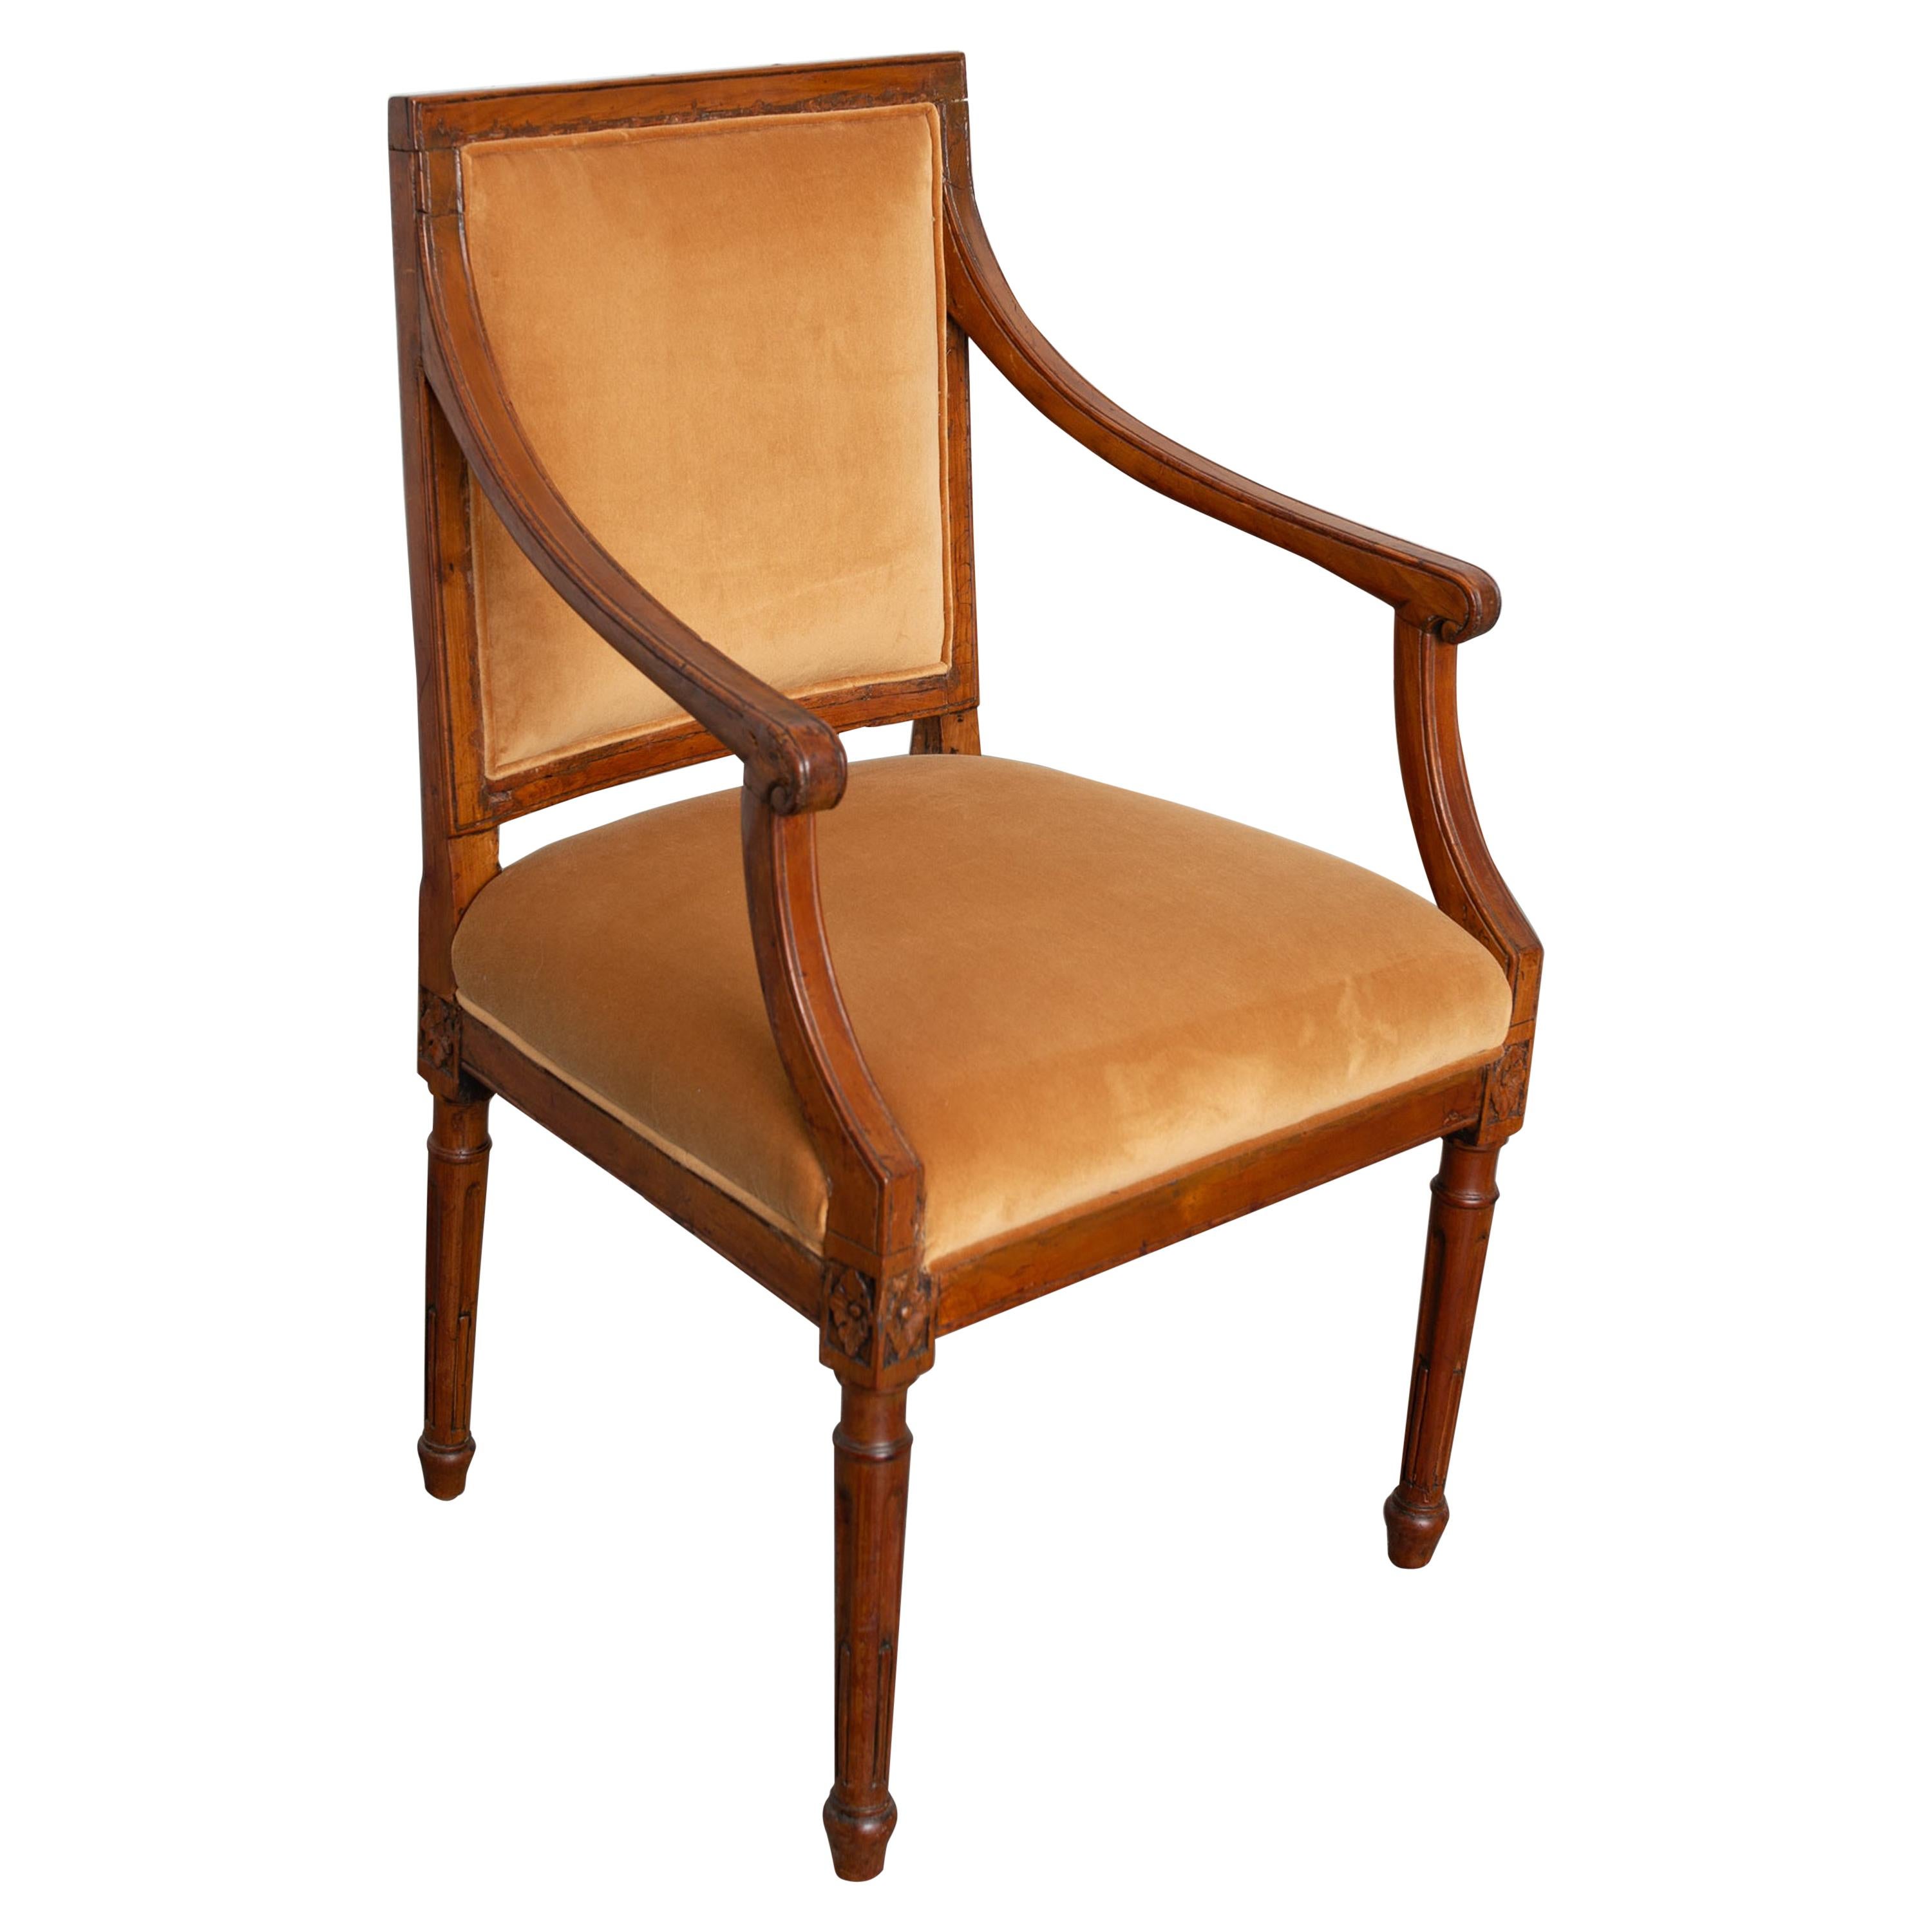 Early 20th Century Louis XVI Style Carved Fruitwood Open Armchair